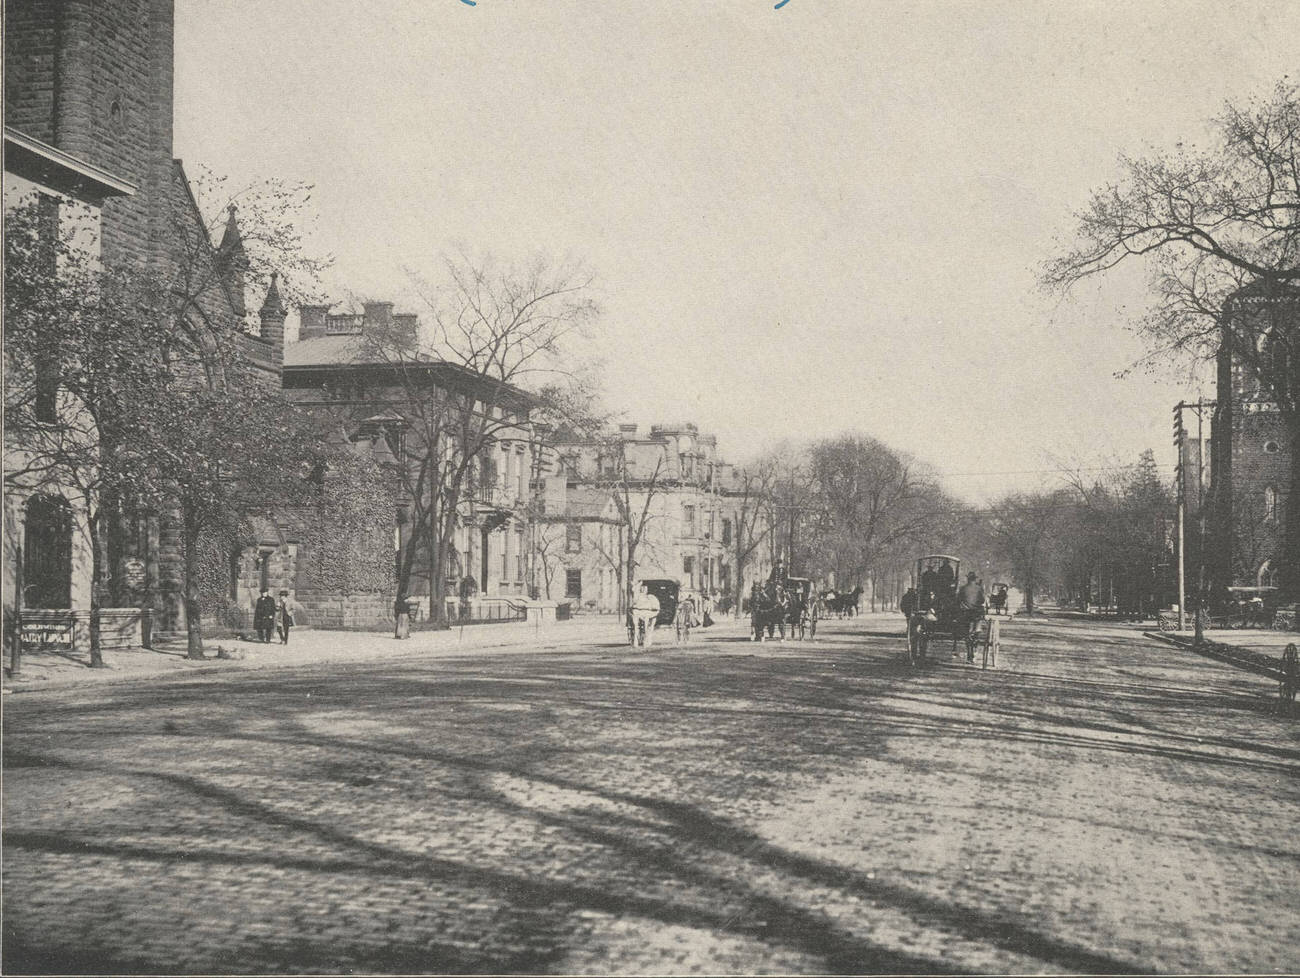 East Broad Street with landmarks including First Congregational Church, 1902.